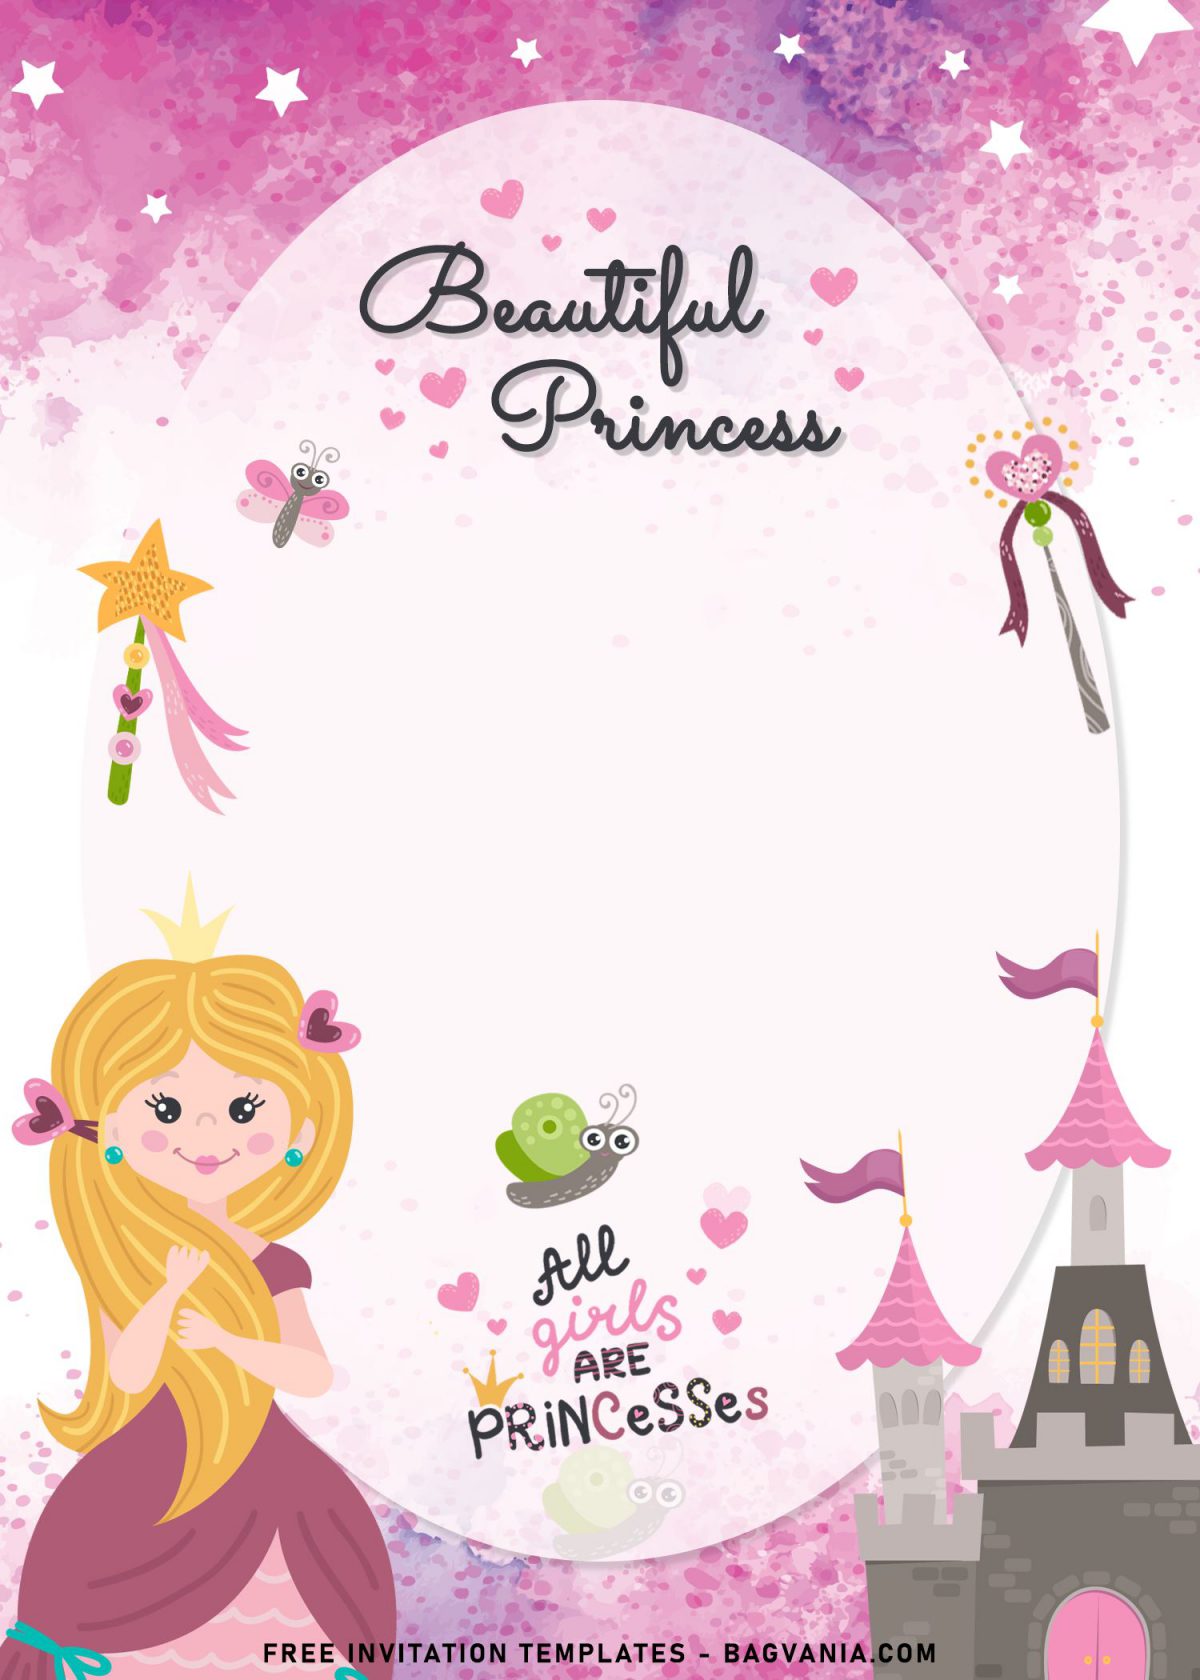 8+ Delightful Princess Birthday Invitation Templates and has watercolor background